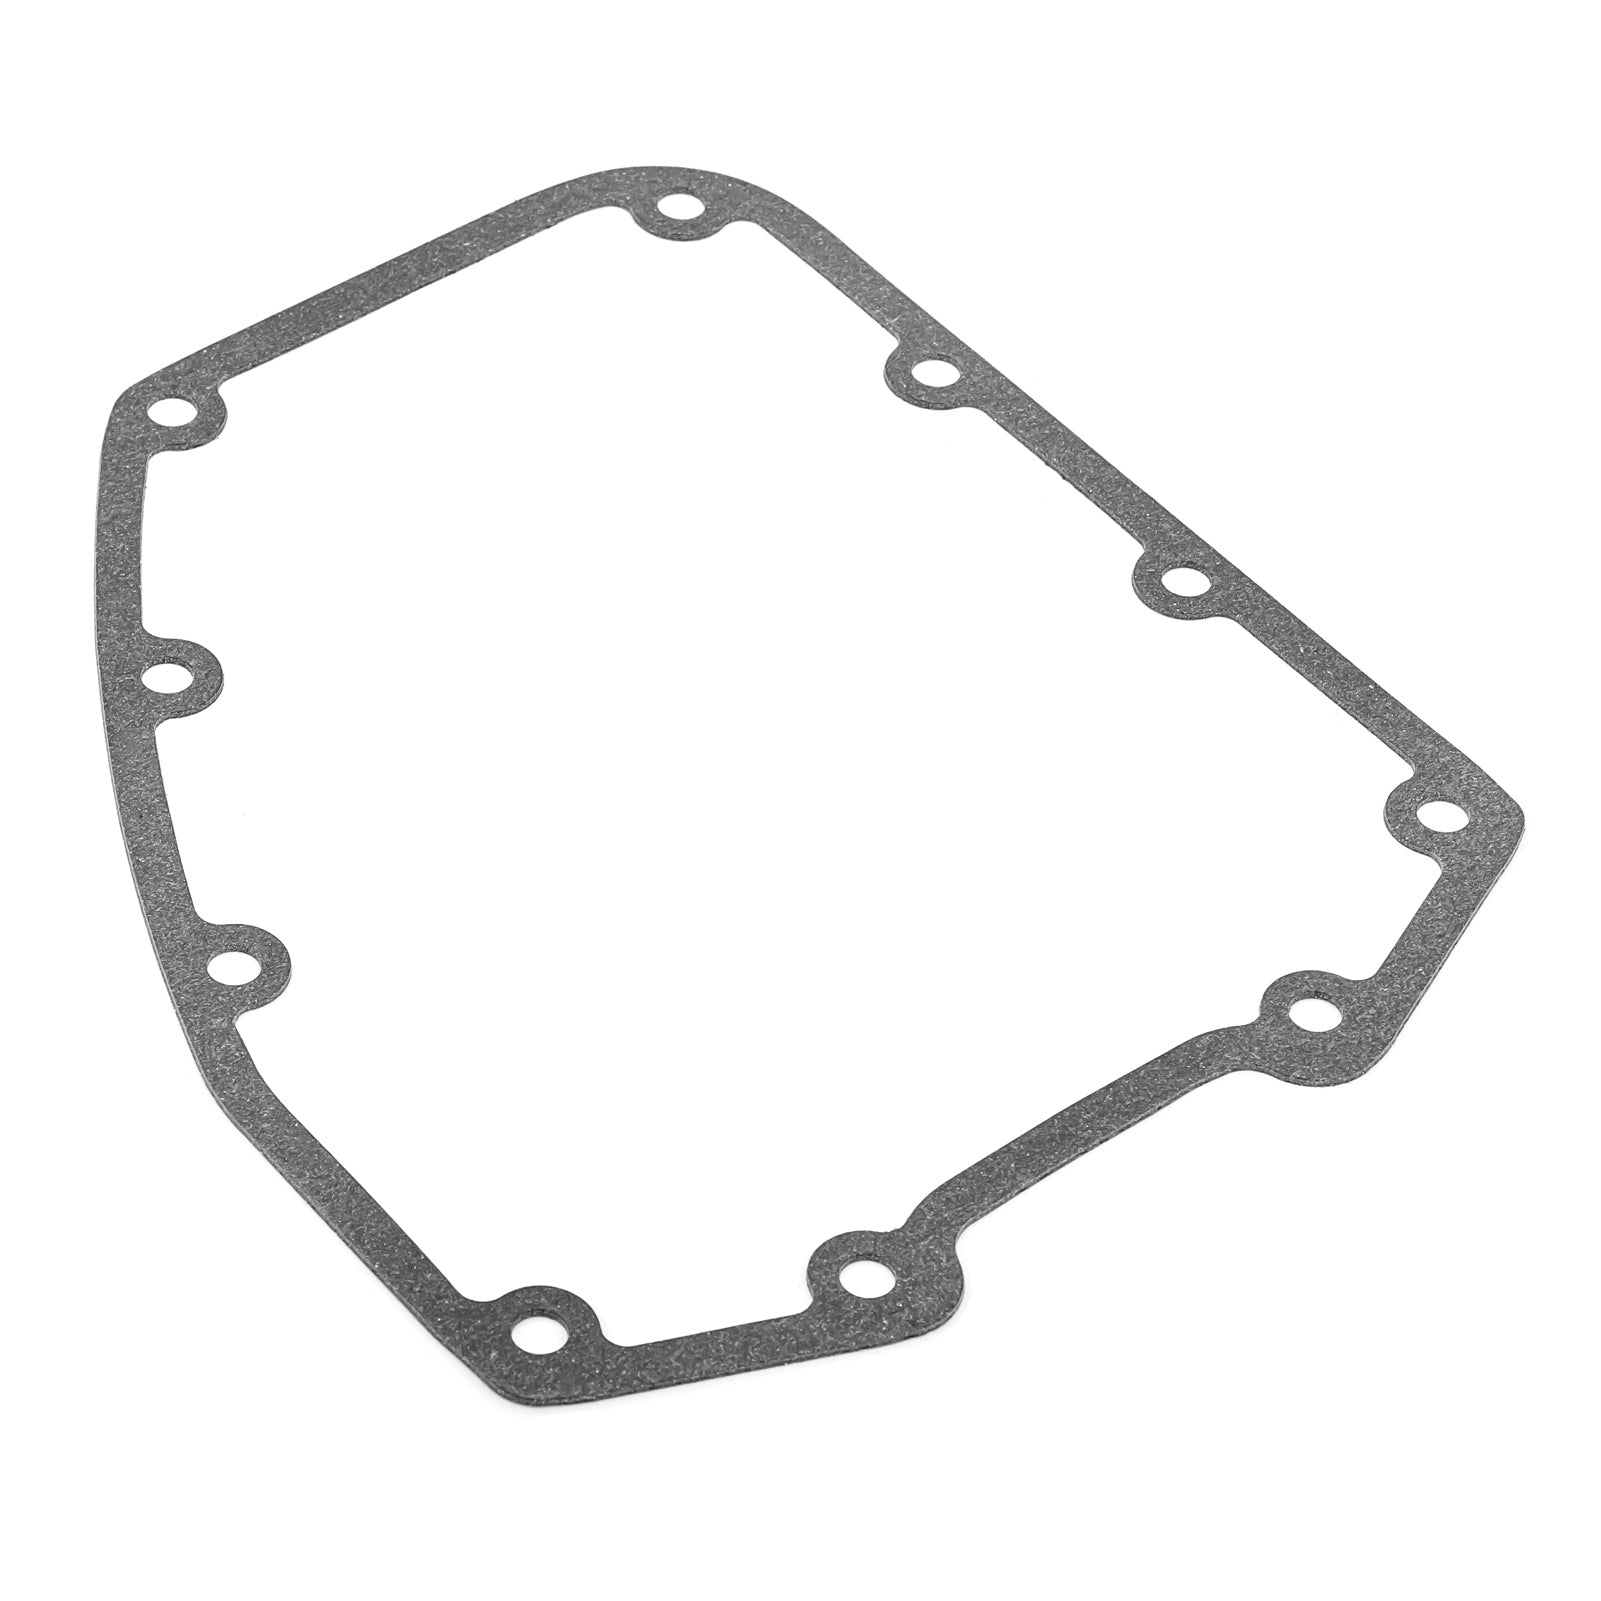 Chain Driven Drive Gasket Bearings For Harley Dyna Softail 07-17 Touring 07-16